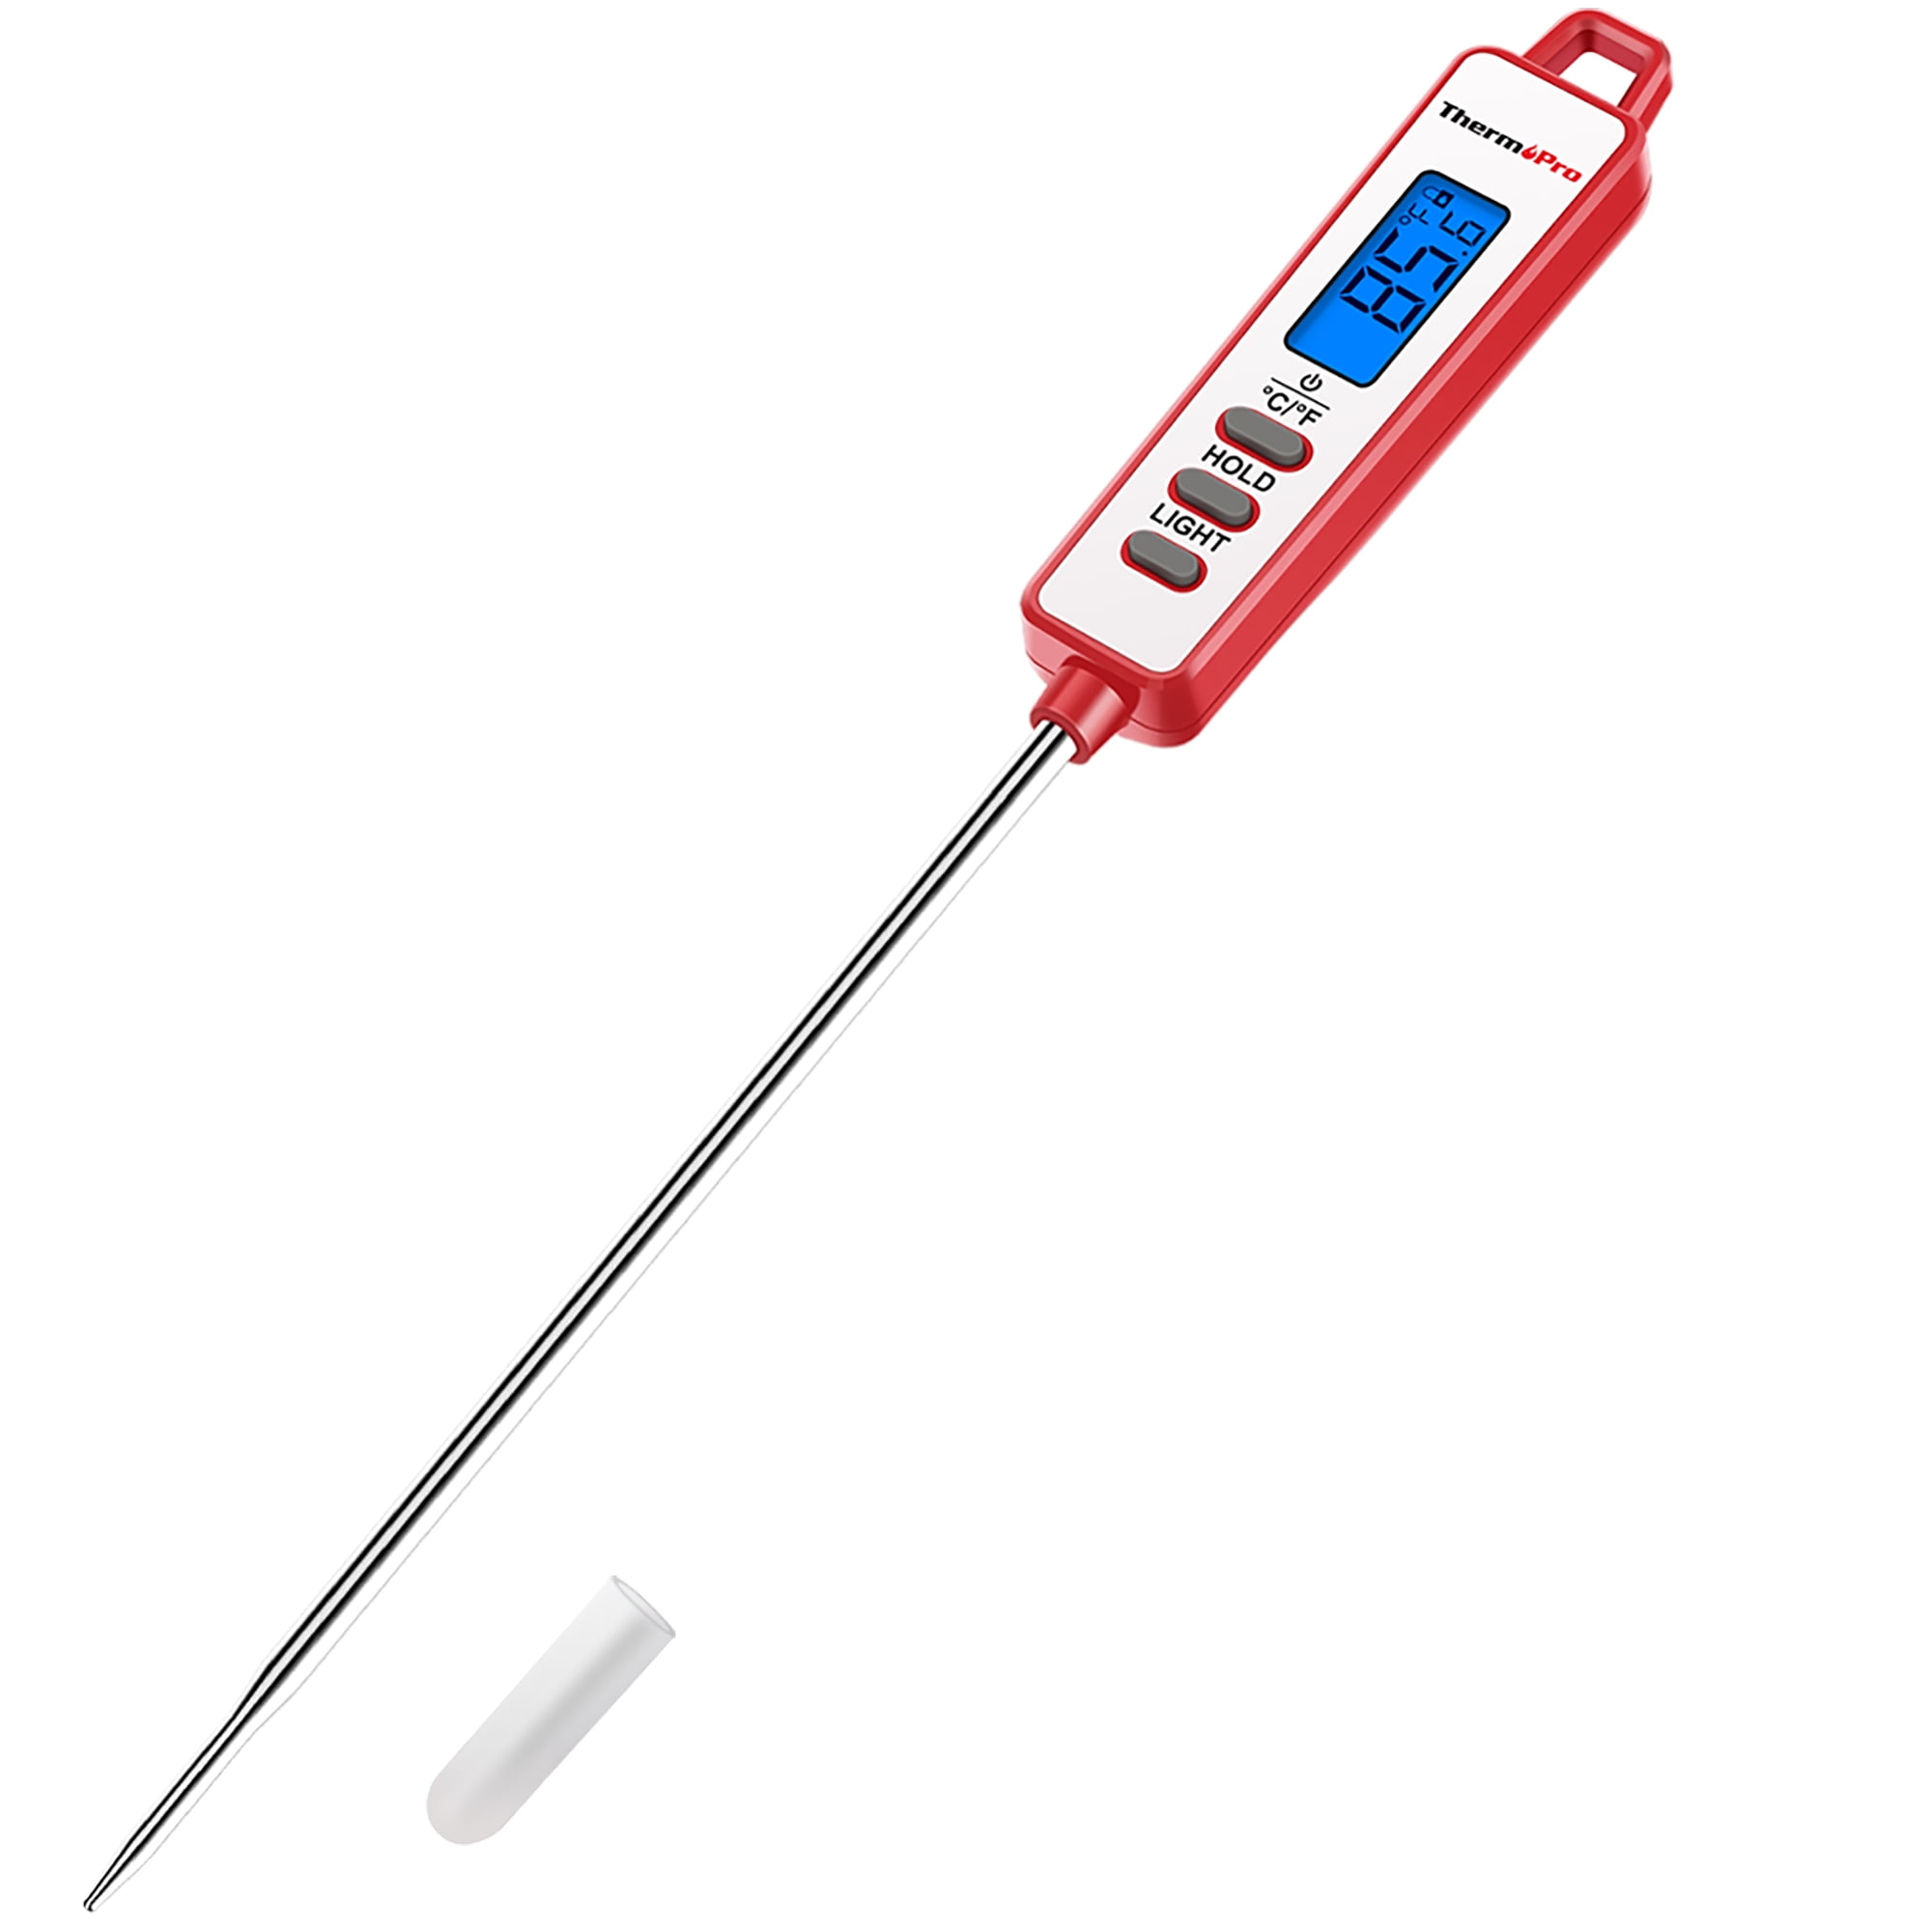 ThermoPro 2 in 1-Infrared and Instant Read Thermometer